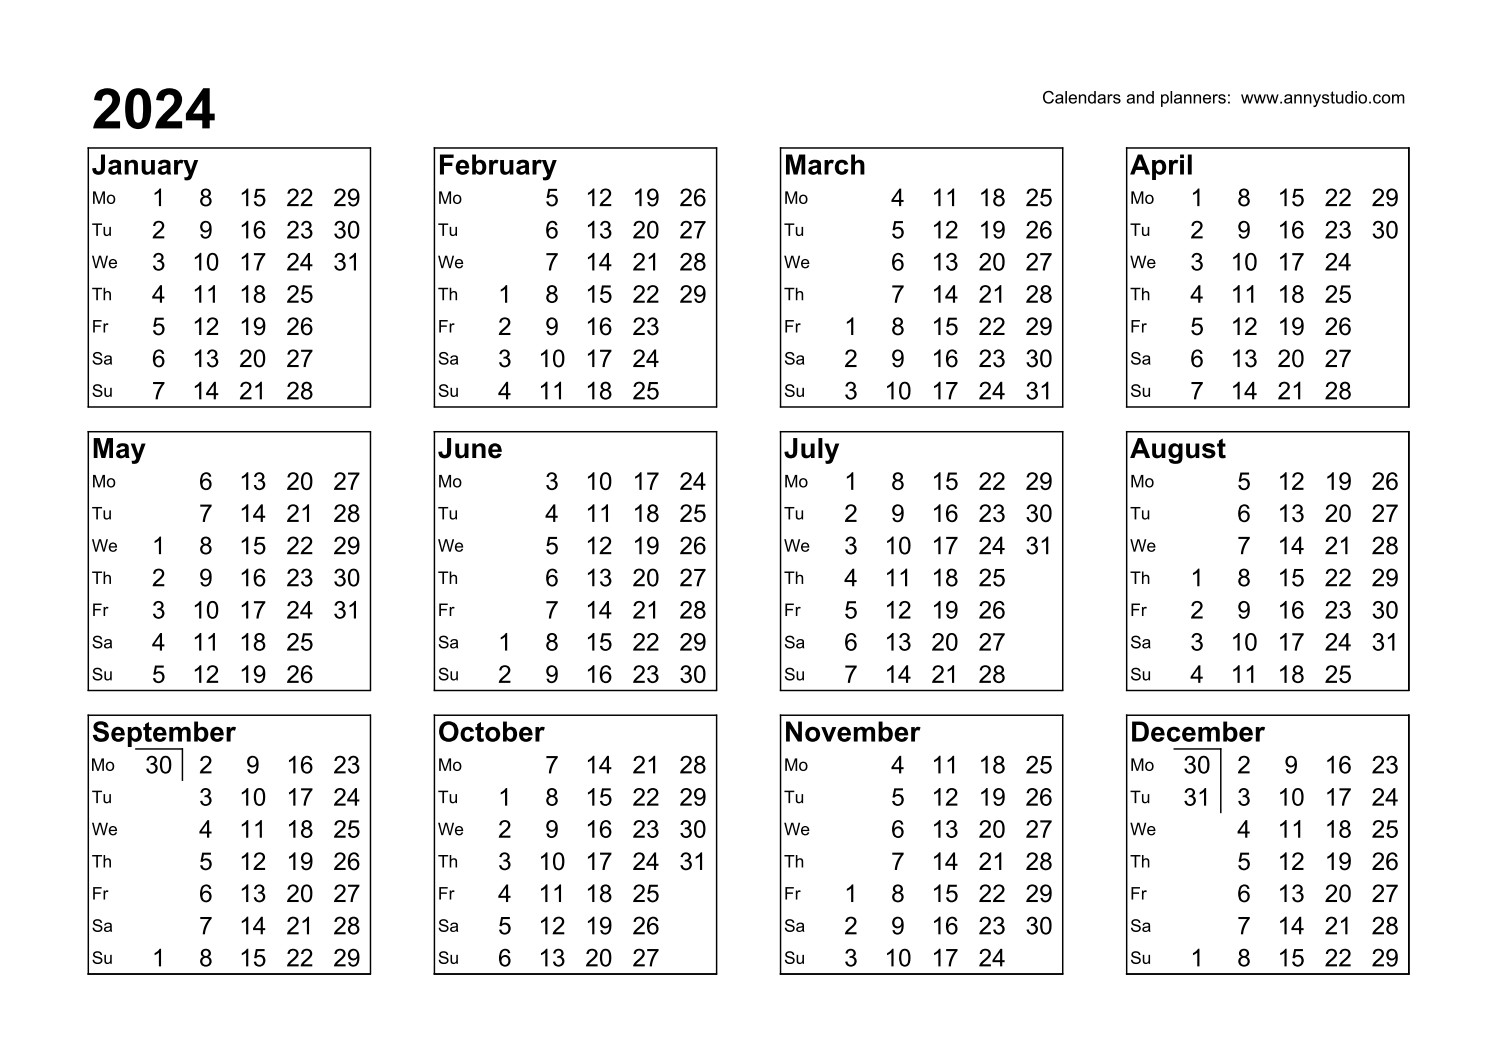 Free Printable Calendars And Planners 2024, 2025 And 2026 | Printable Calendar 2024 South Africa